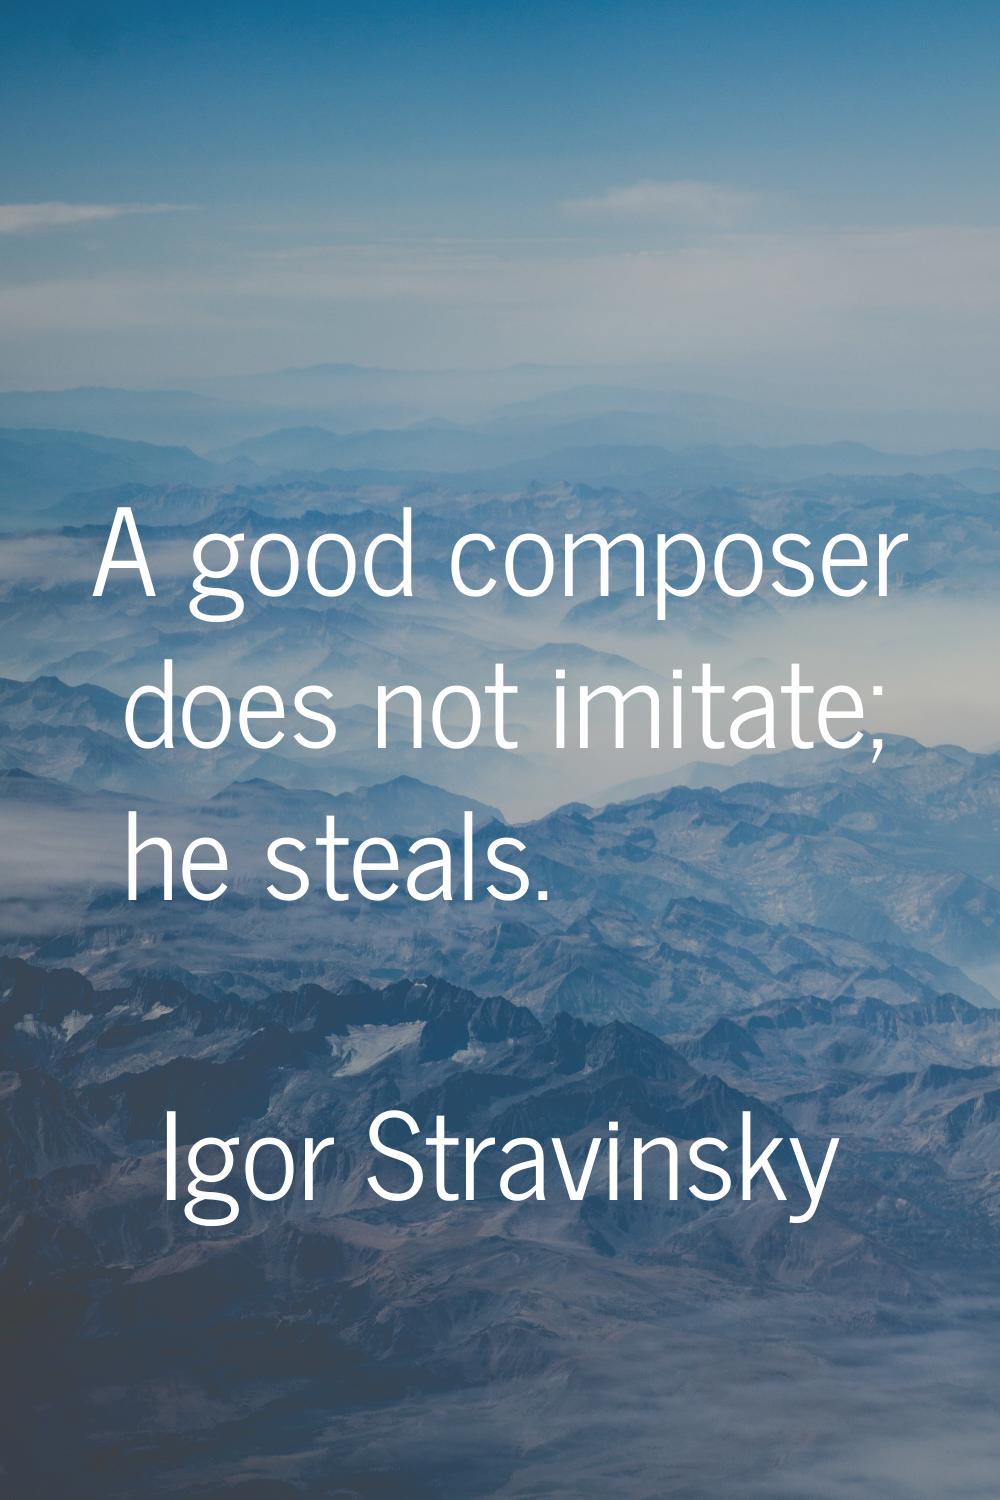 A good composer does not imitate; he steals.